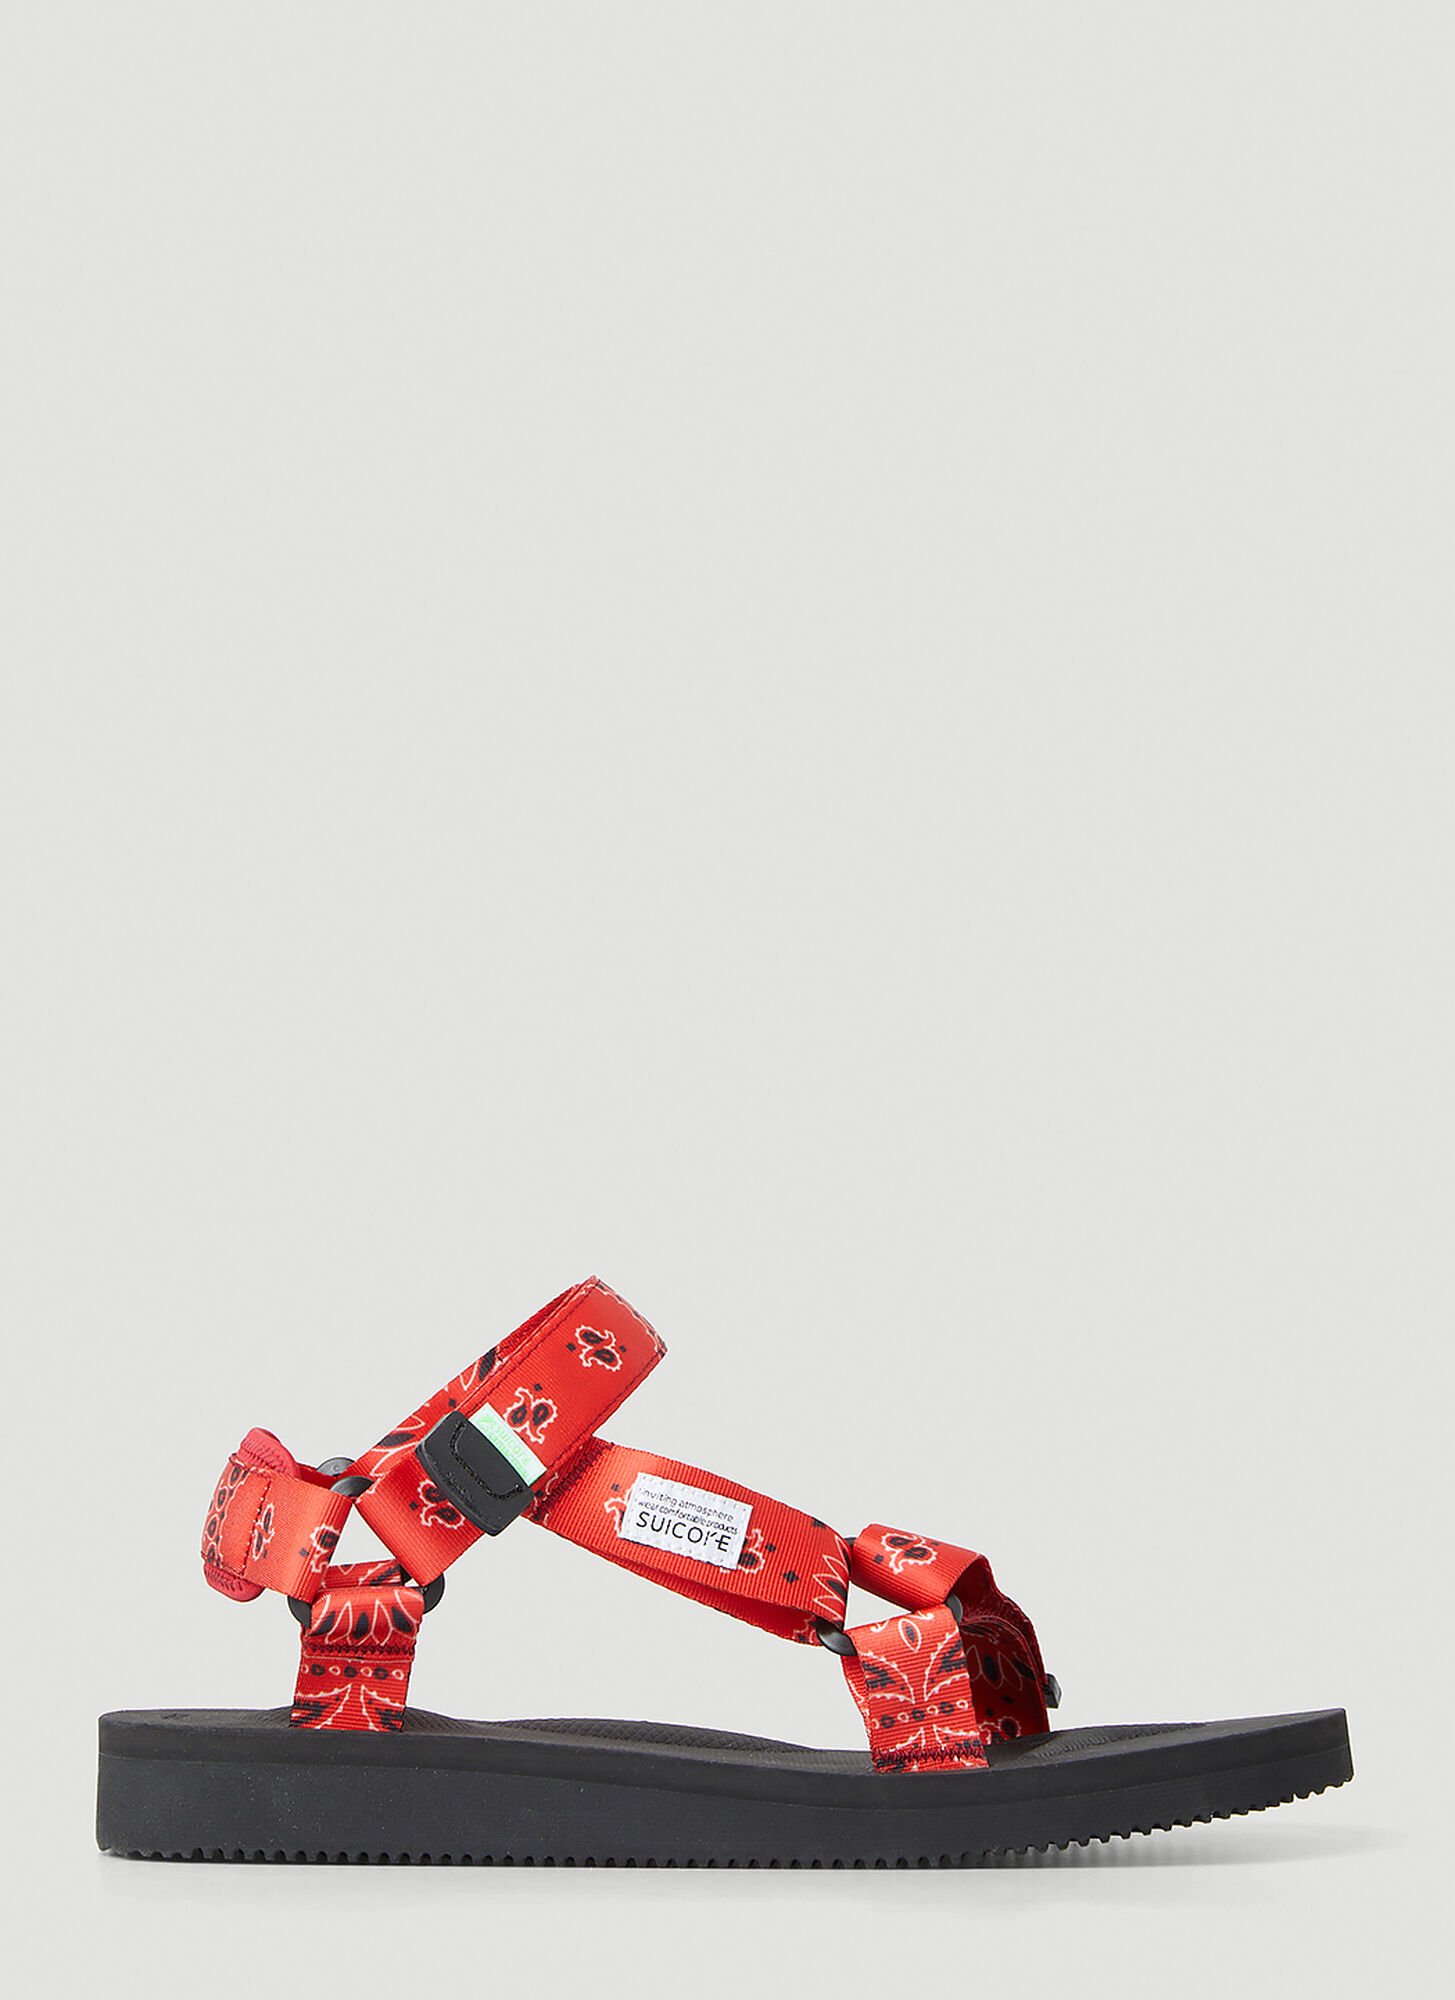 Shop Suicoke Depa Cab Sandals In Red